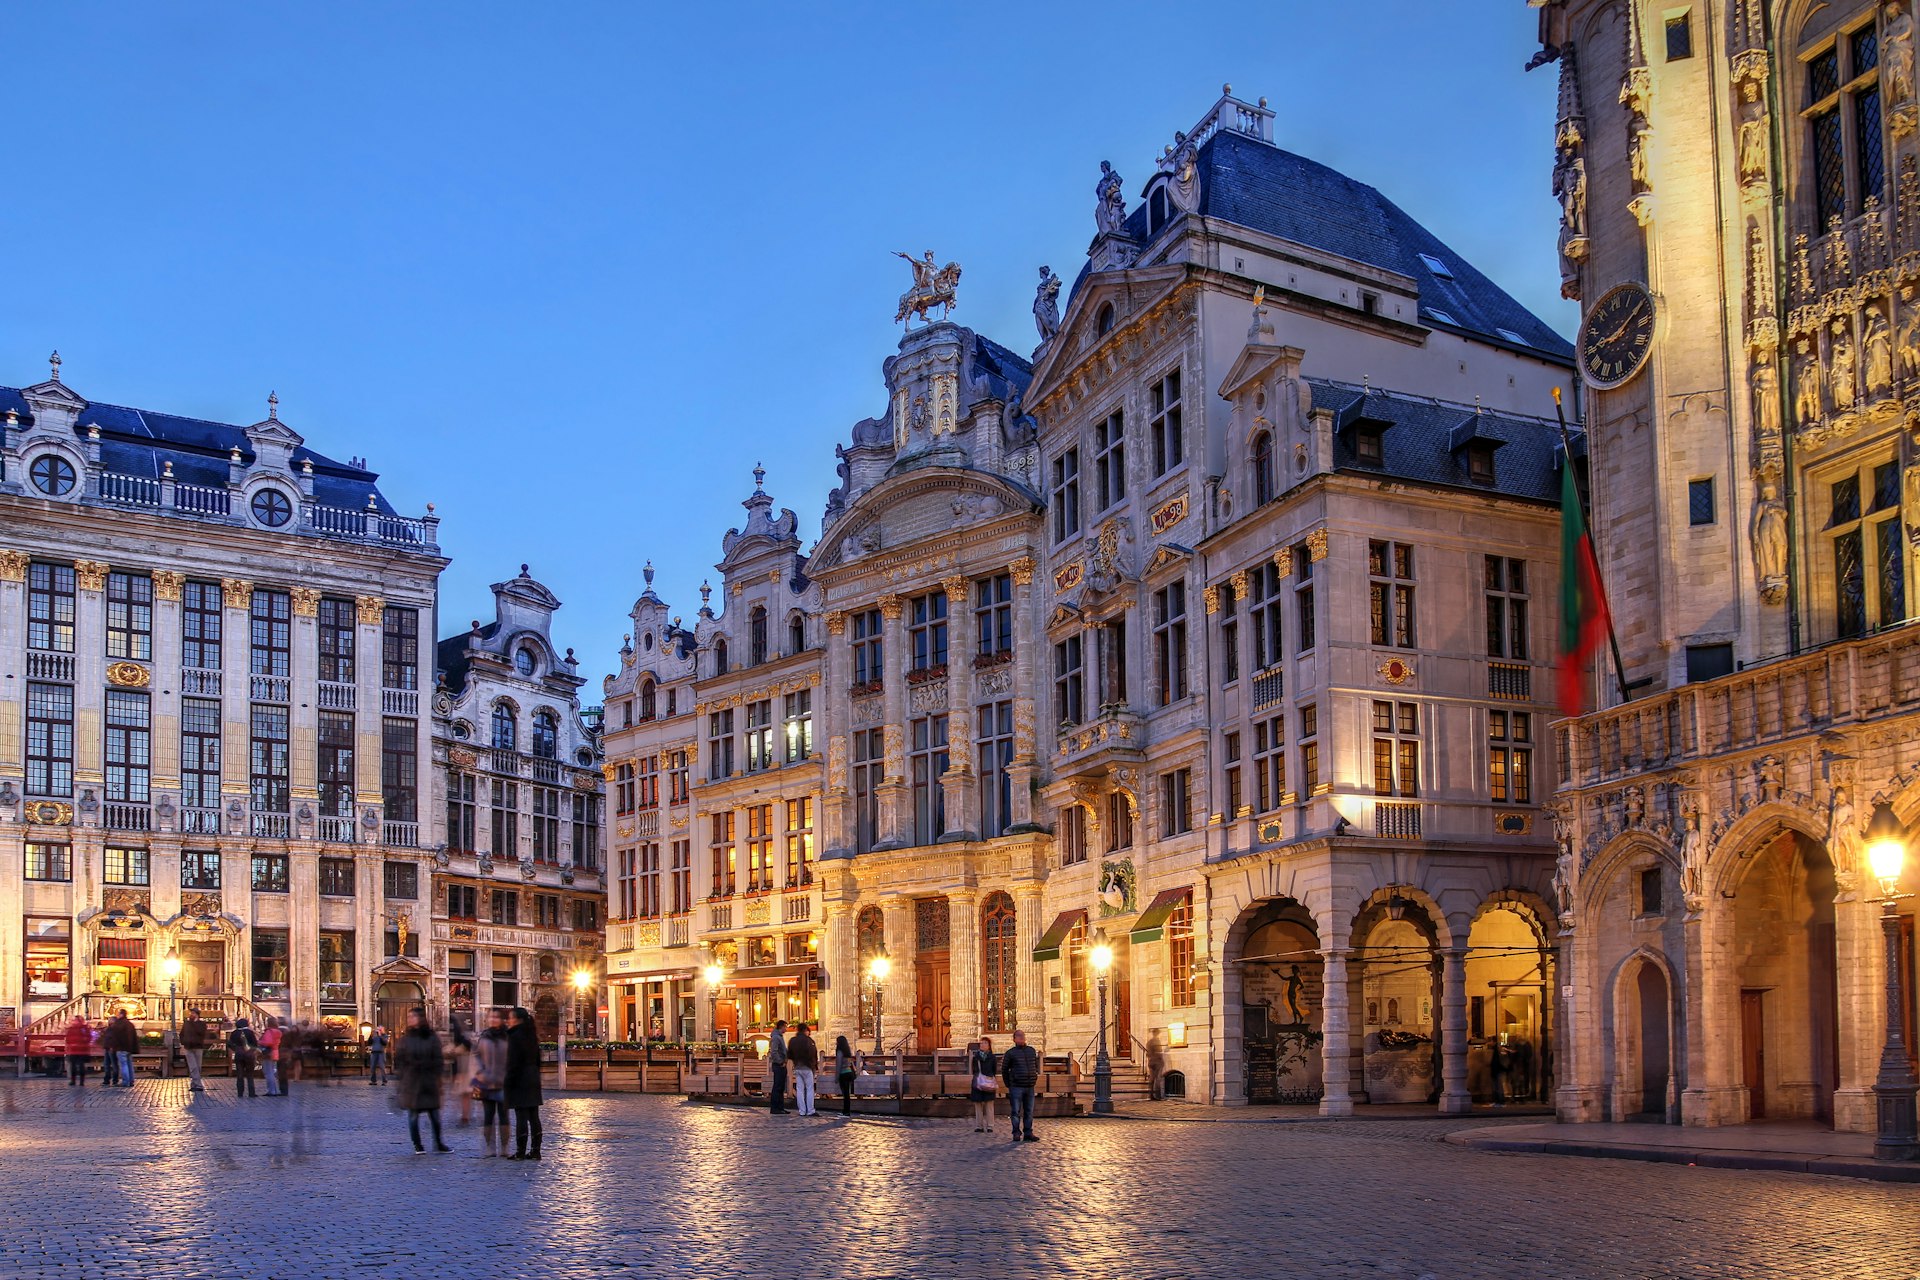 The Grand Place in Brussels in the evening with hardly anyone around